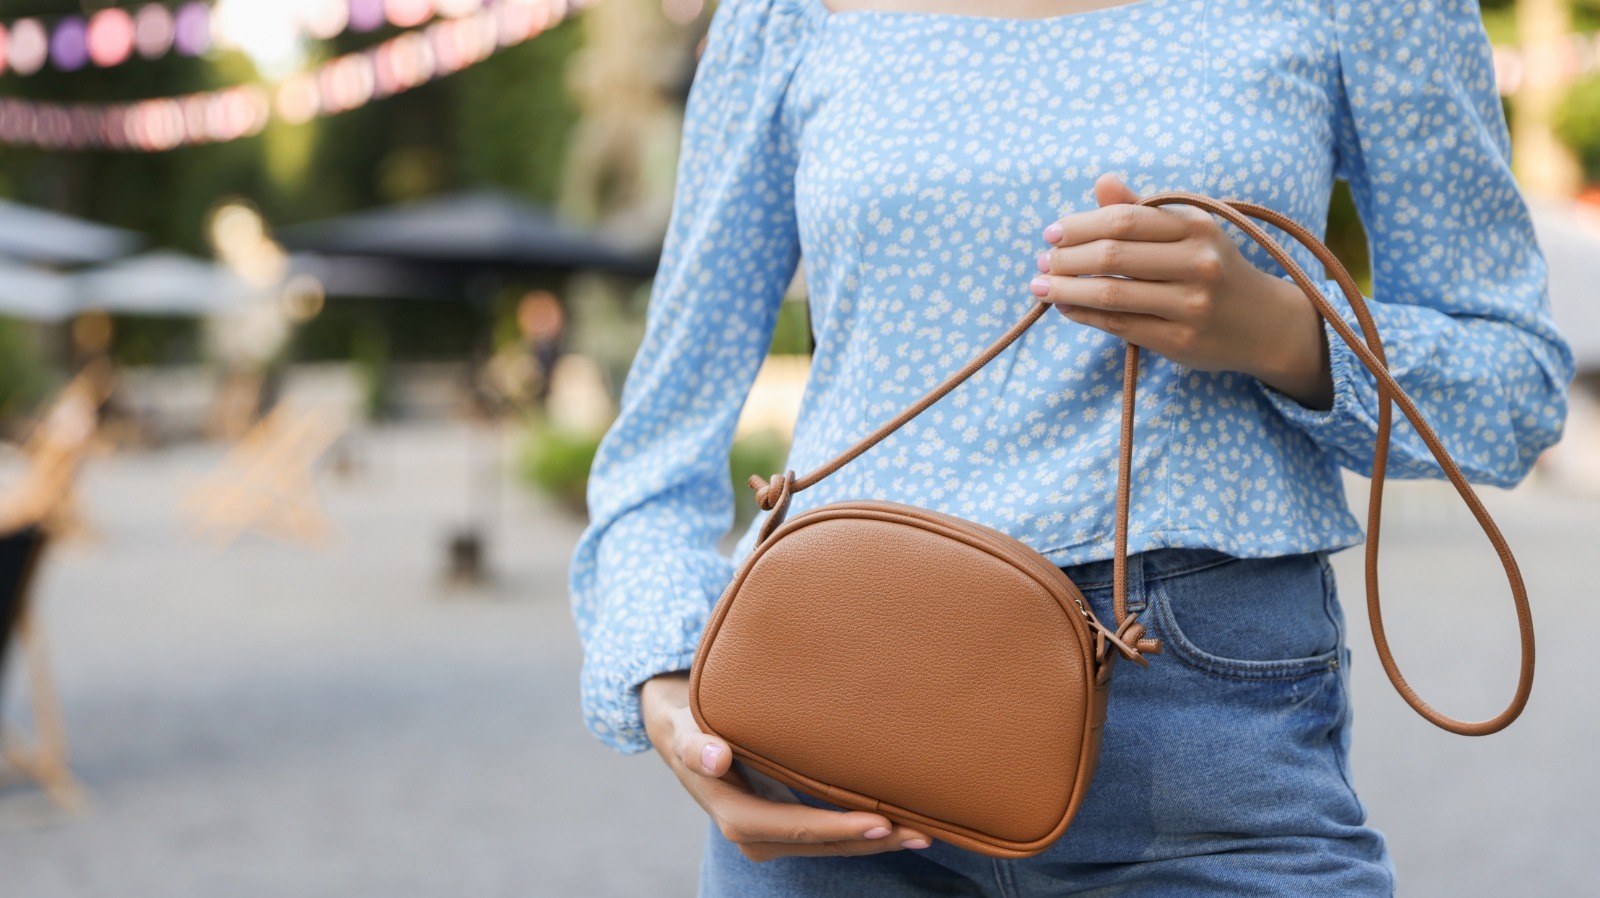 Bye micro purses: Spring tote bags you can actually fit everything in